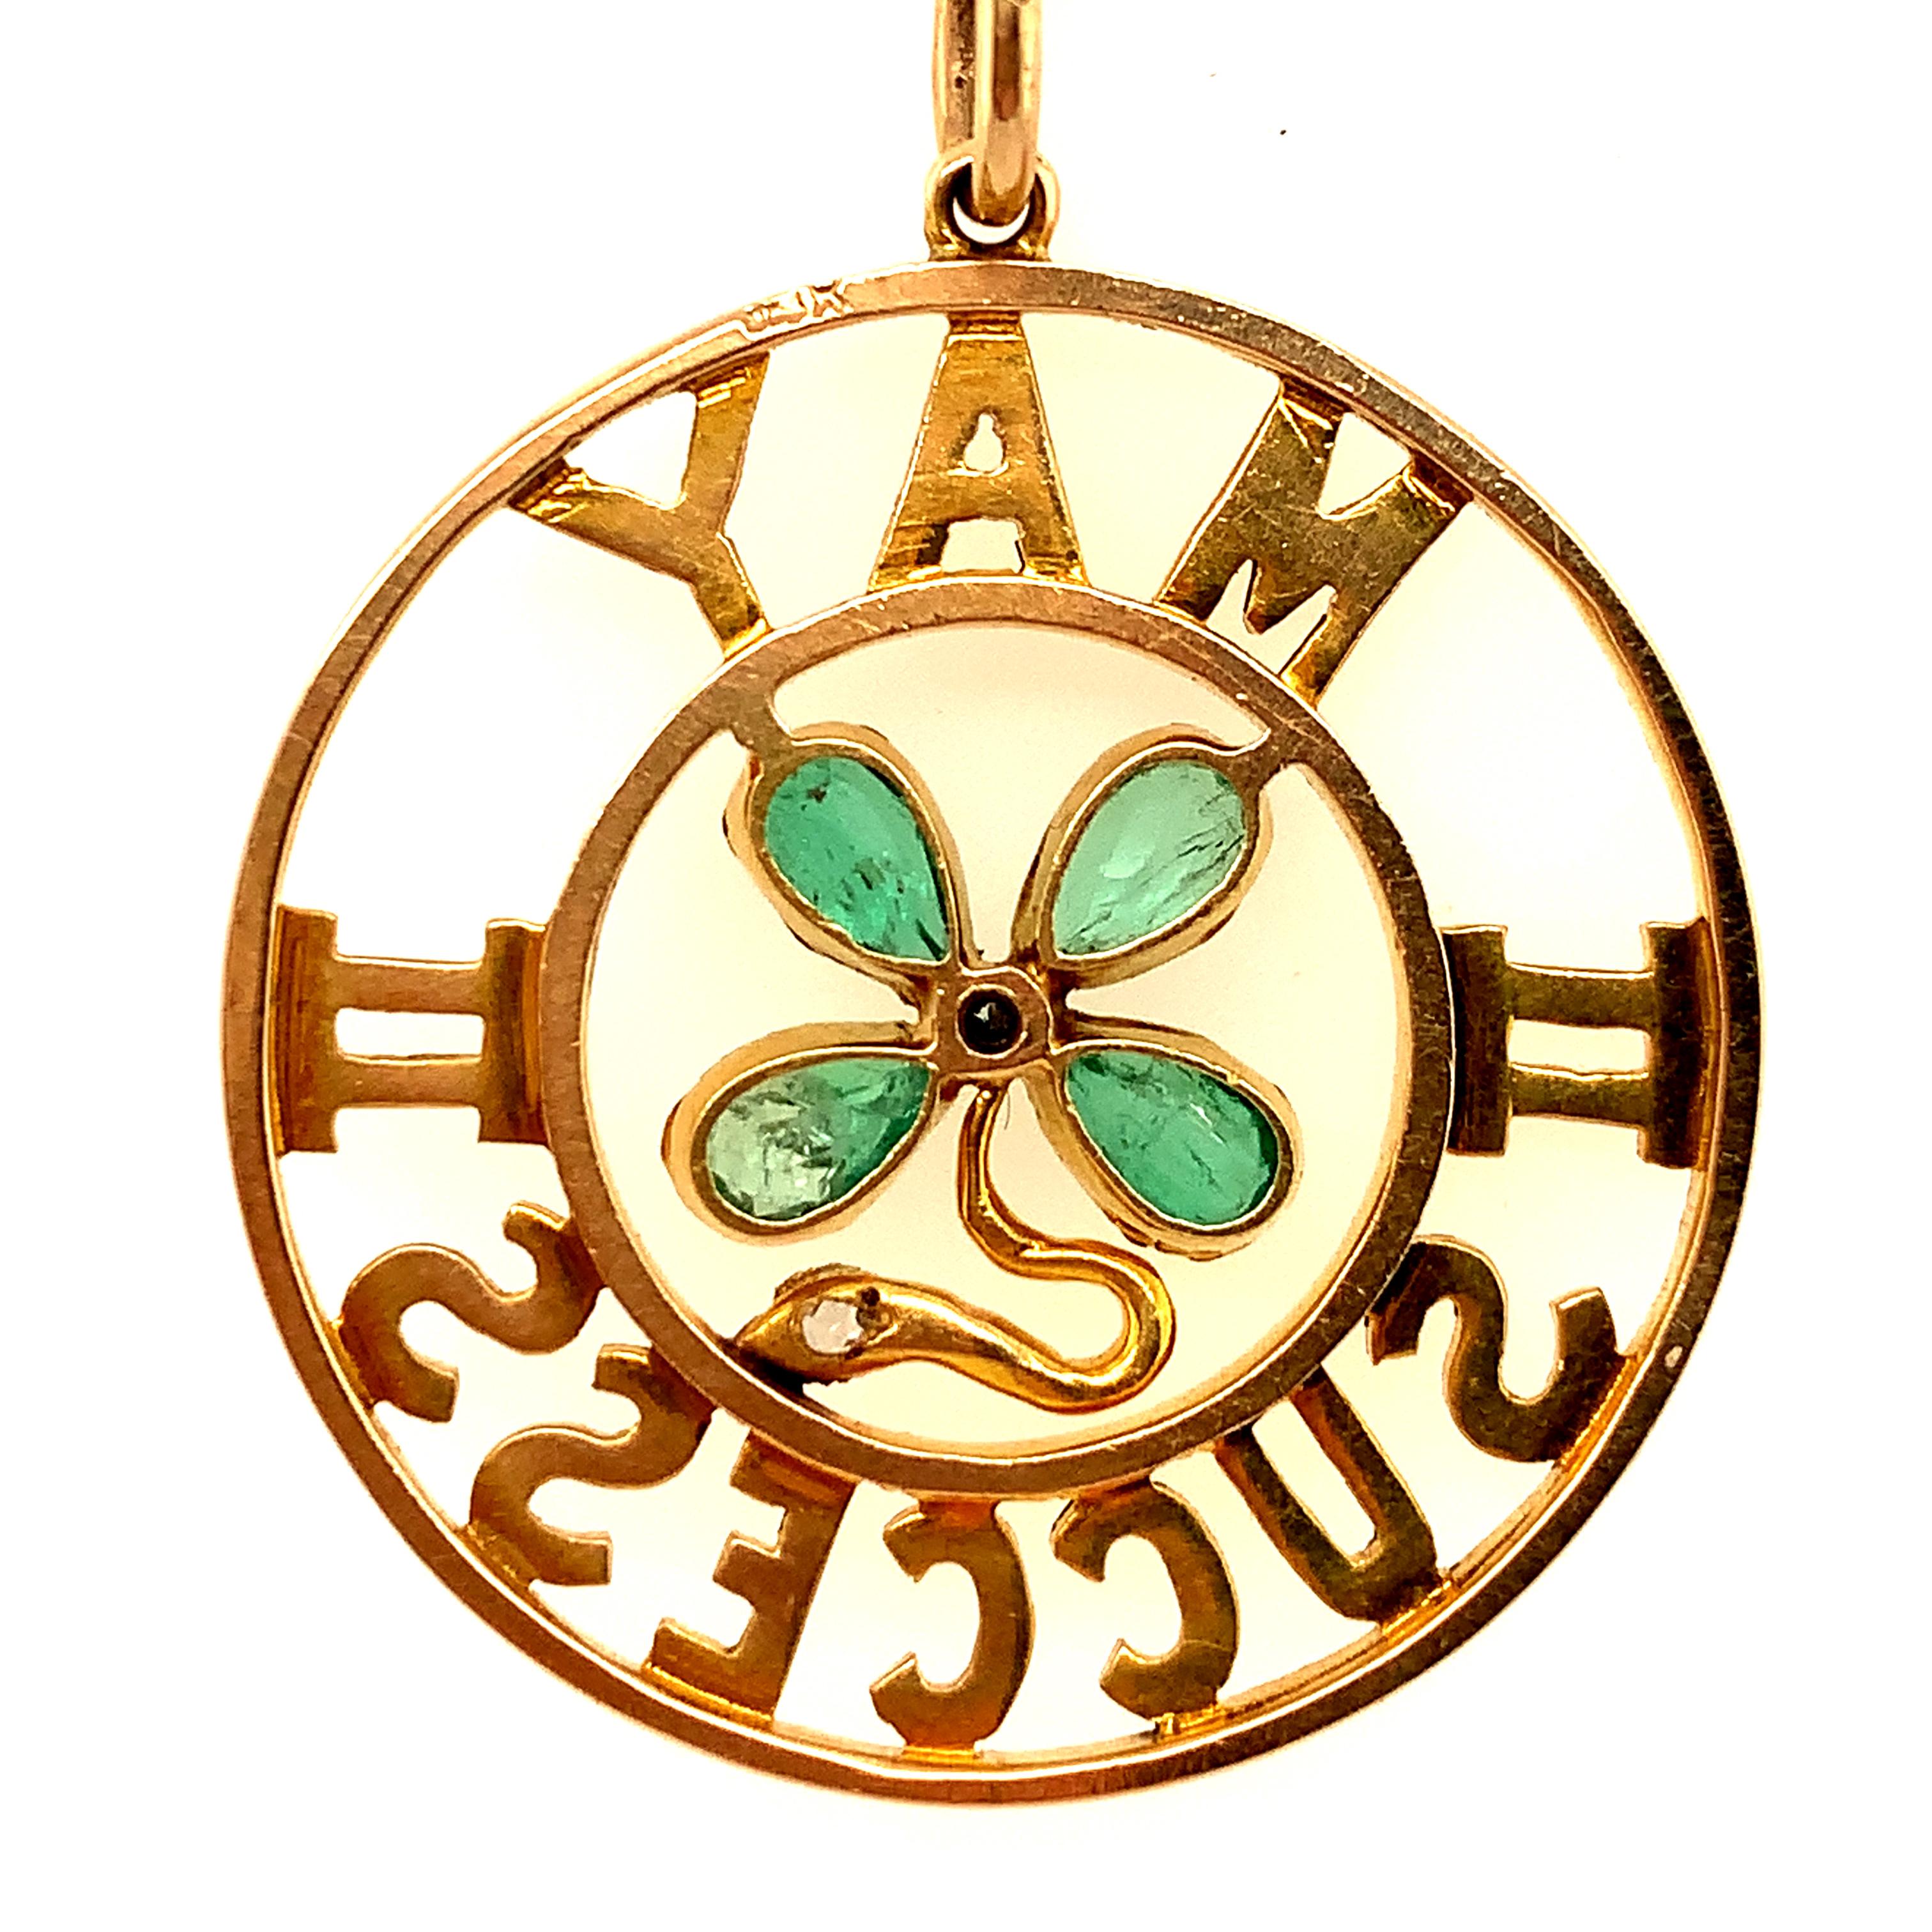 Outstanding pendant/charm:  Two cut-out circles.  The center circle is set with a figural 